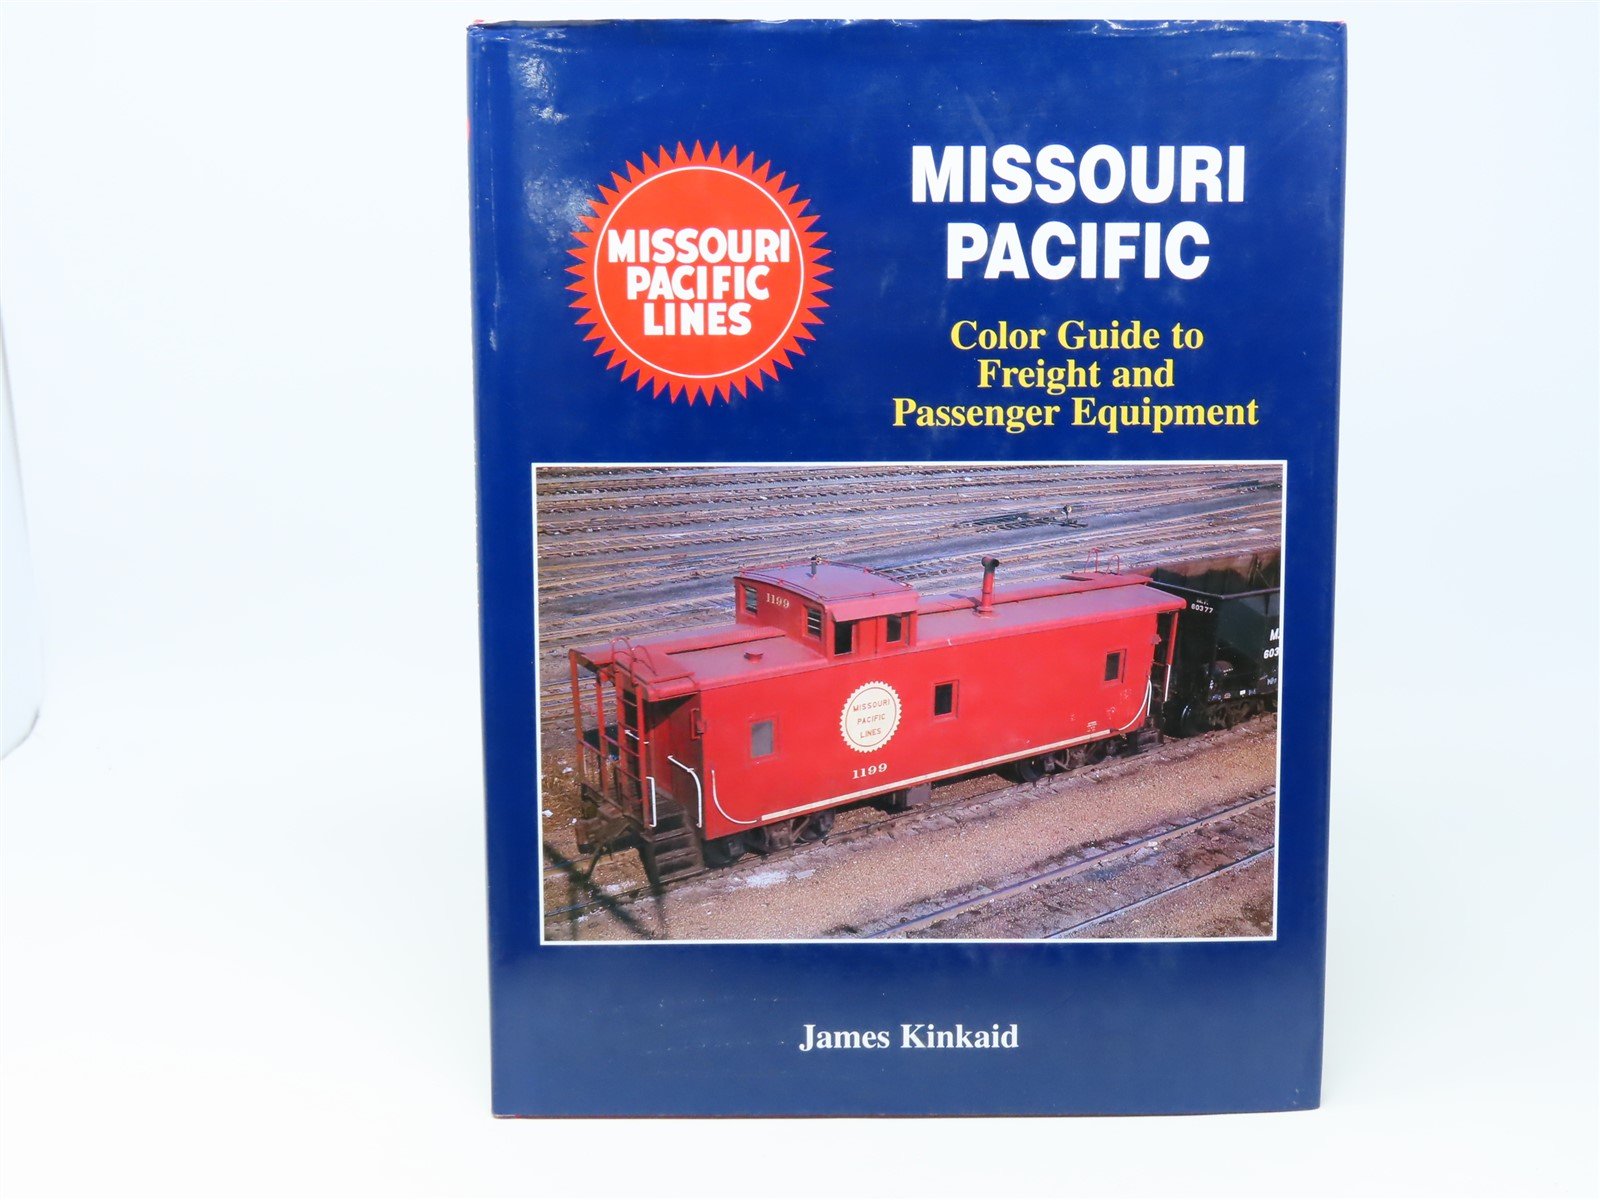 Morning Sun - Missouri Pacific In Color by James Kinkaid ©2004 HC Book